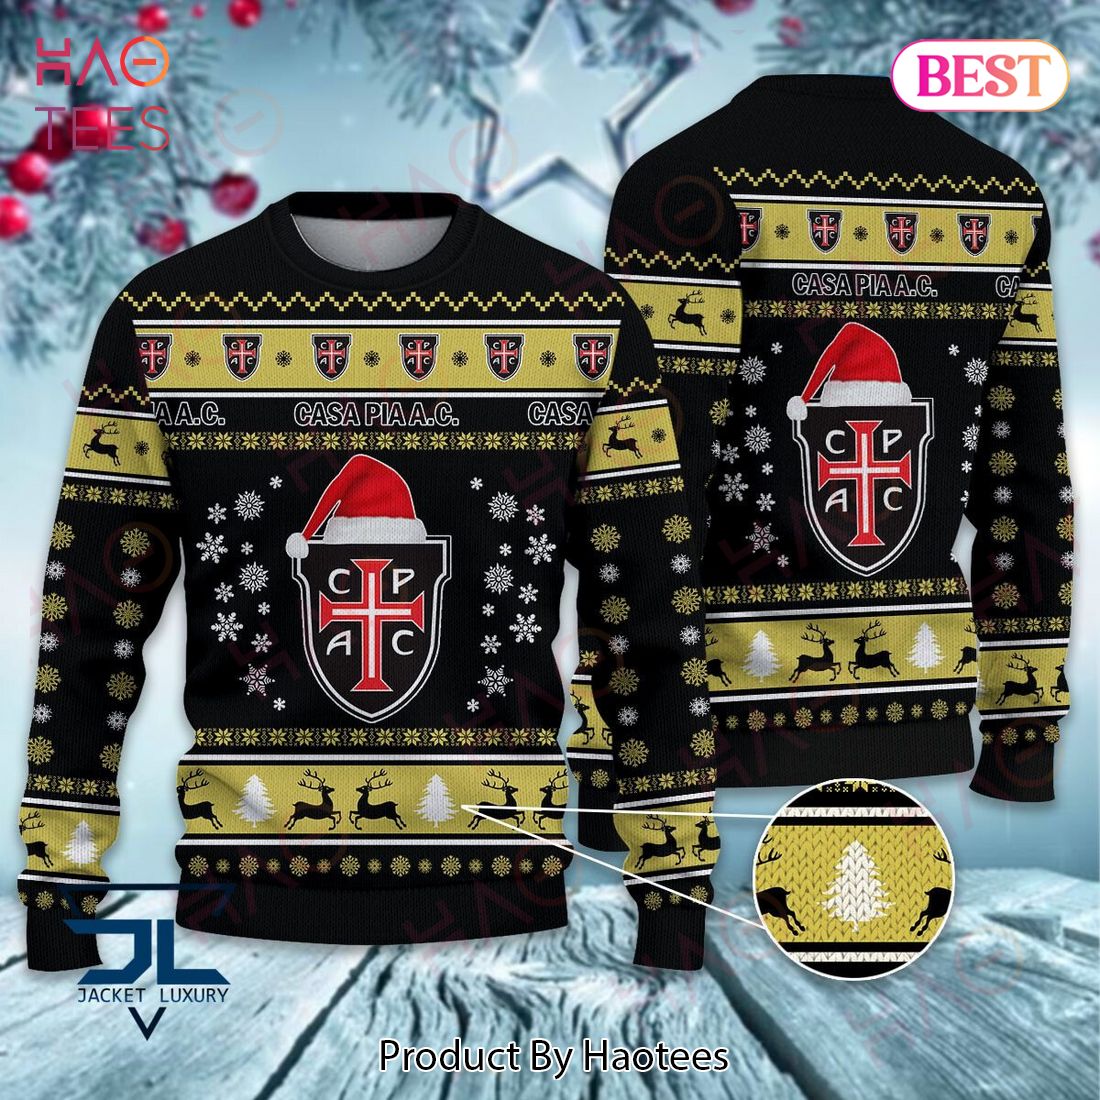 Casa Pia A.C Black Mix Gold Christmas Luxury Brand Sweater Limited Edition